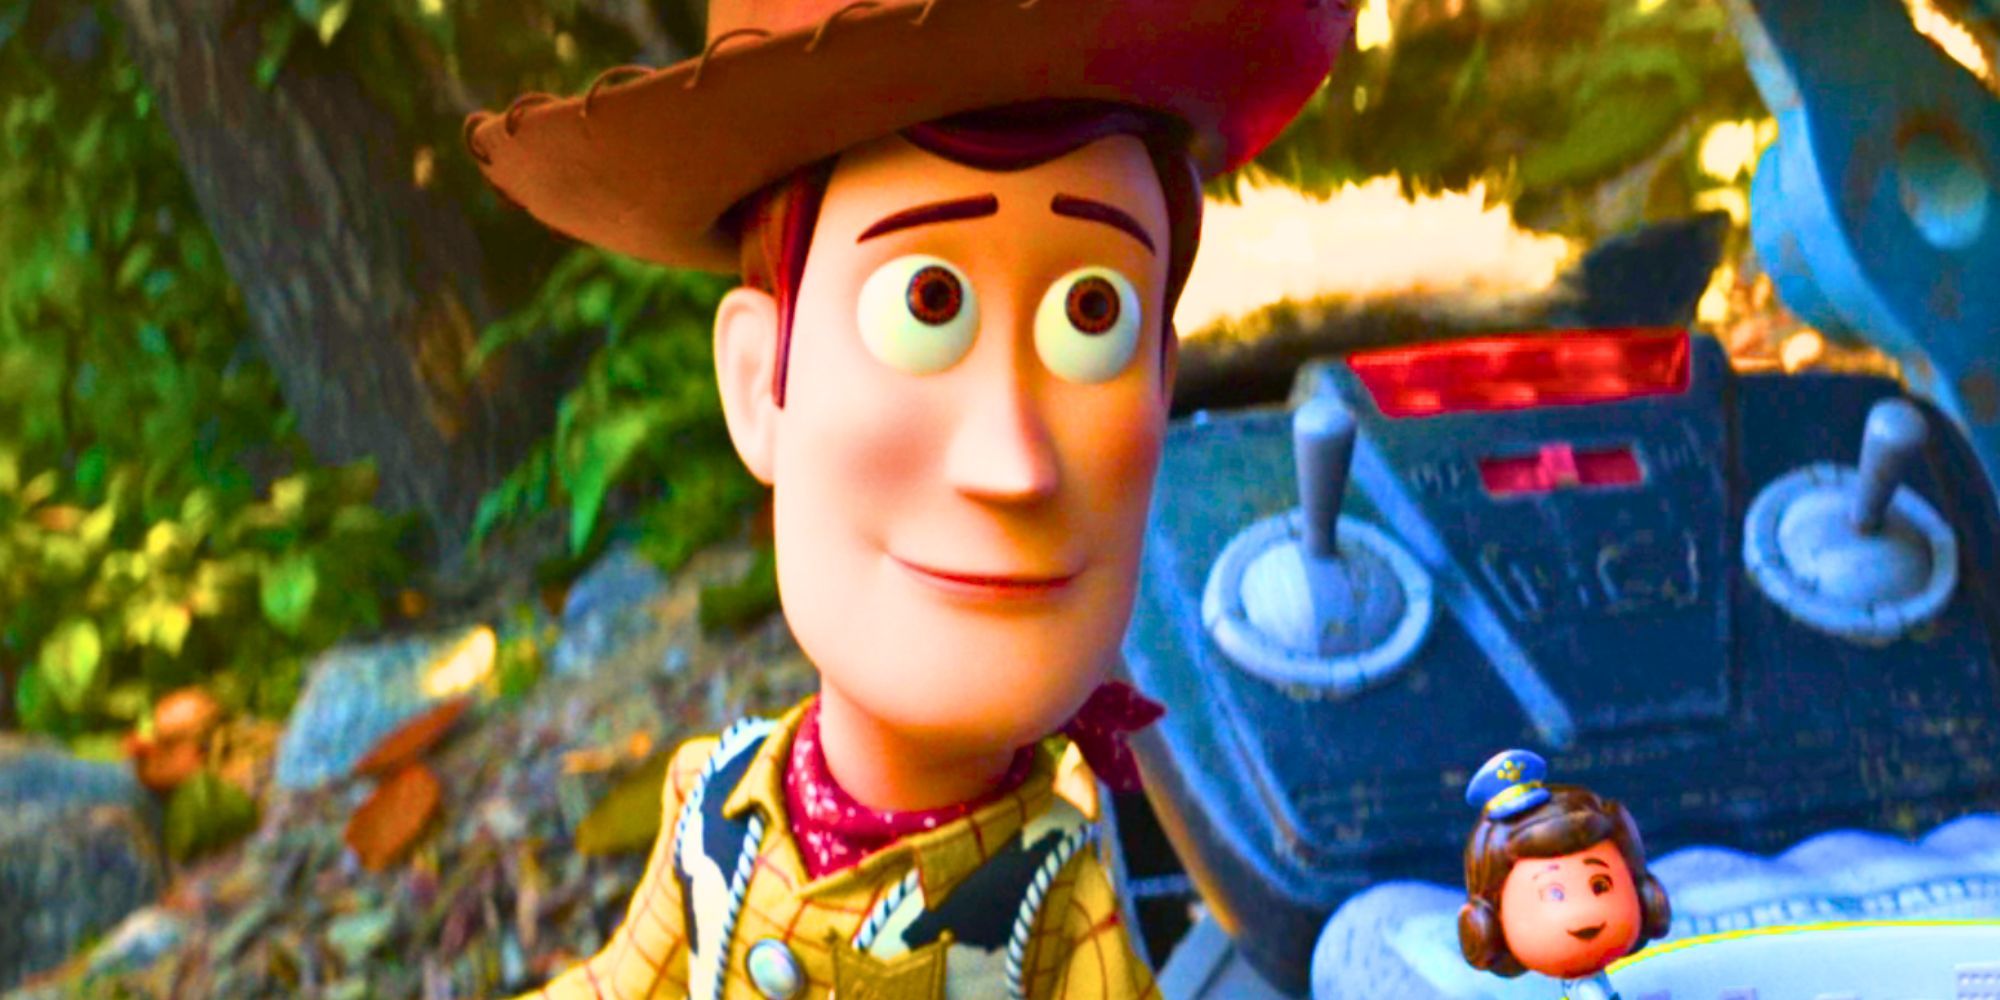 Woody smiling at the camera in Toy Story 4